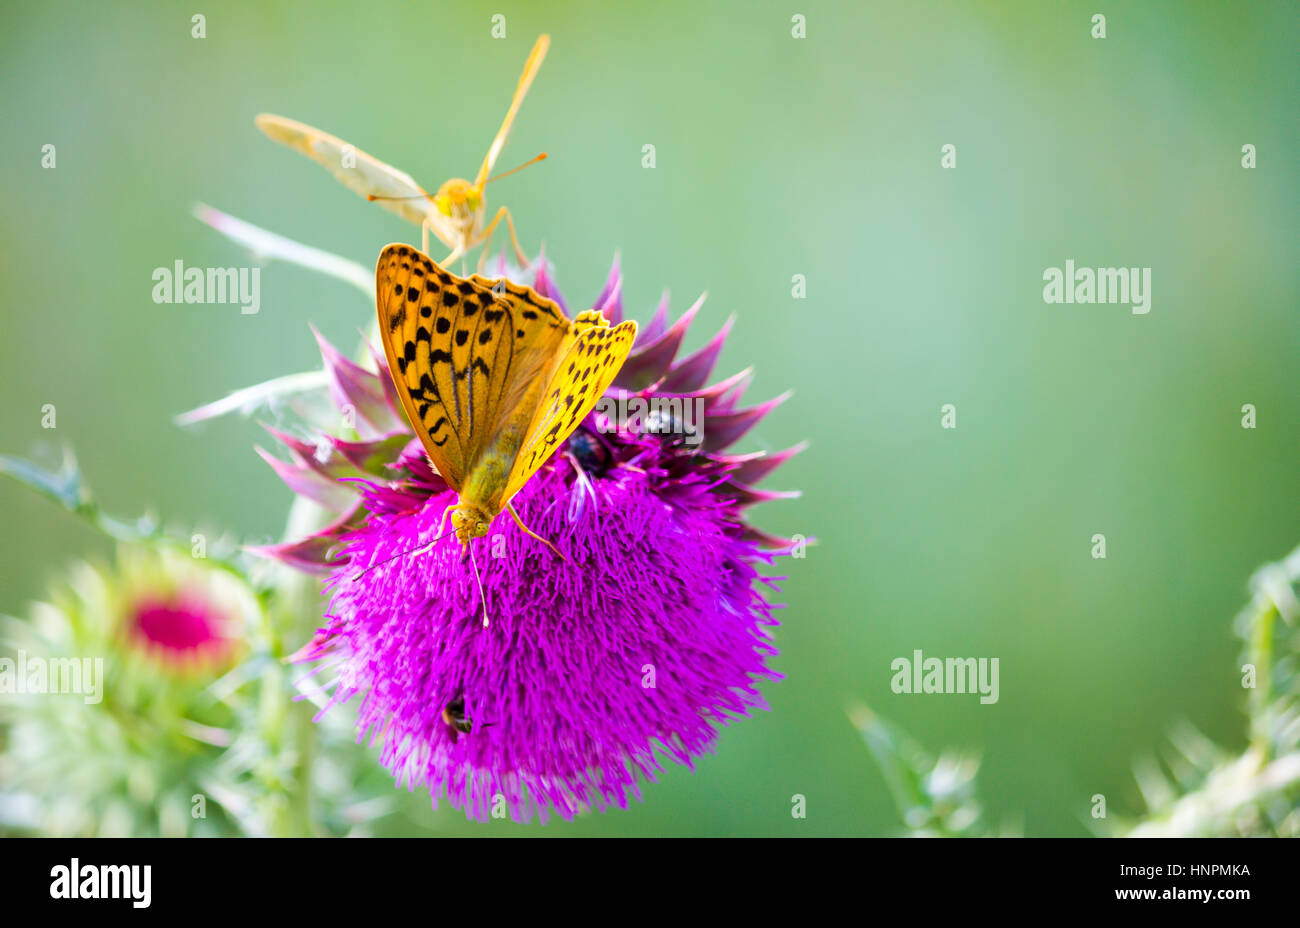 Pair of Argynnis pandora butterflies with opened wings sitting on a Cotton thistle flower Stock Photo